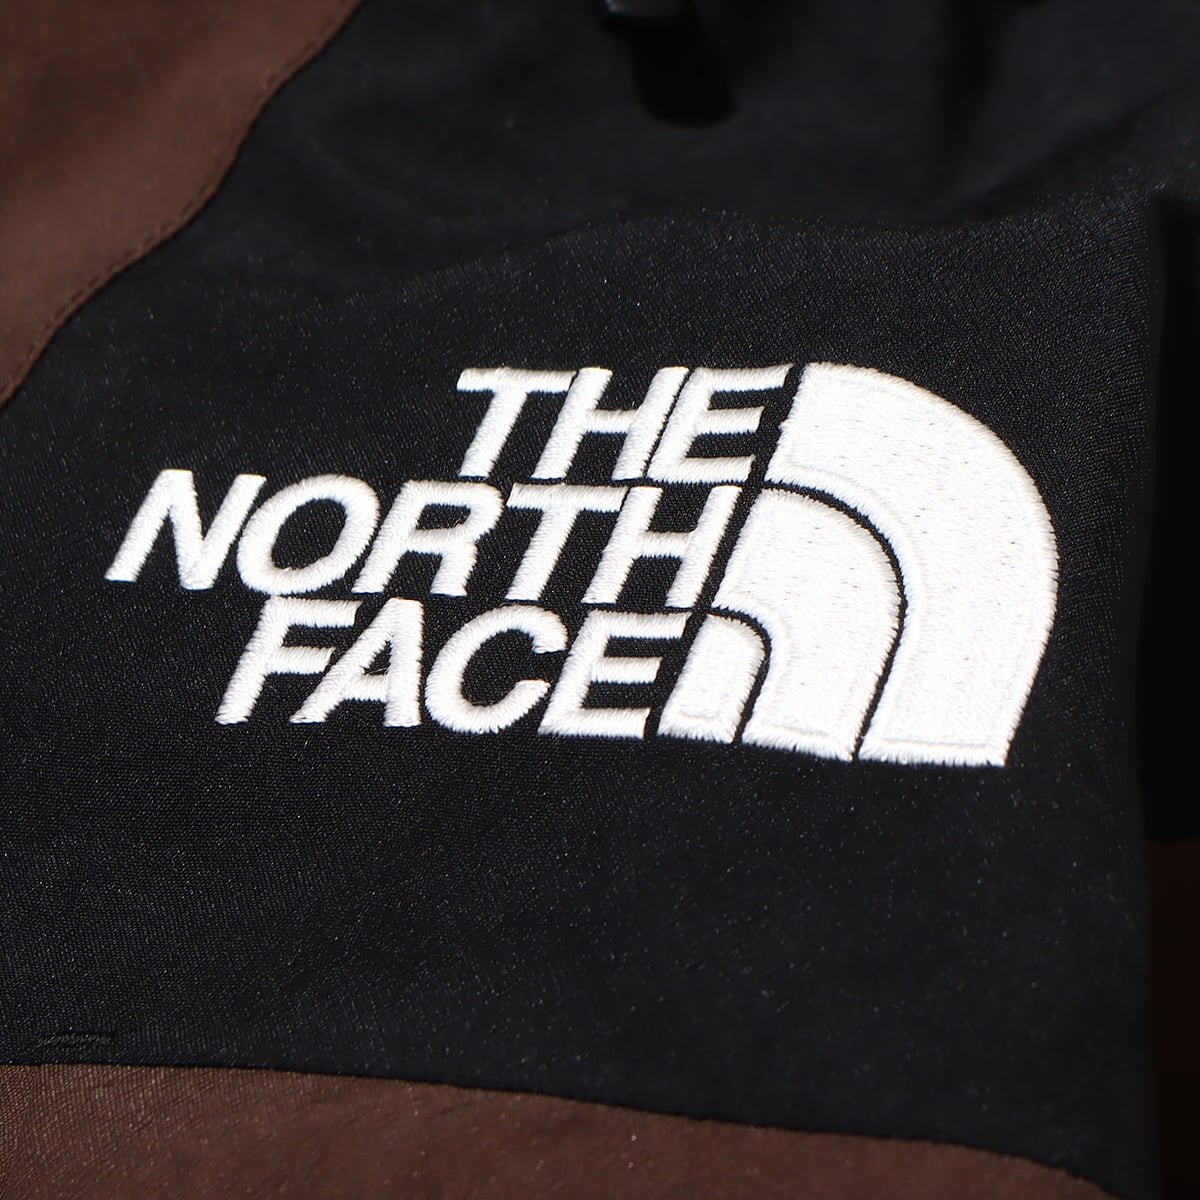 THE NORTH FACE MOUNTAIN JACKET ココアブラウン 22FW-I